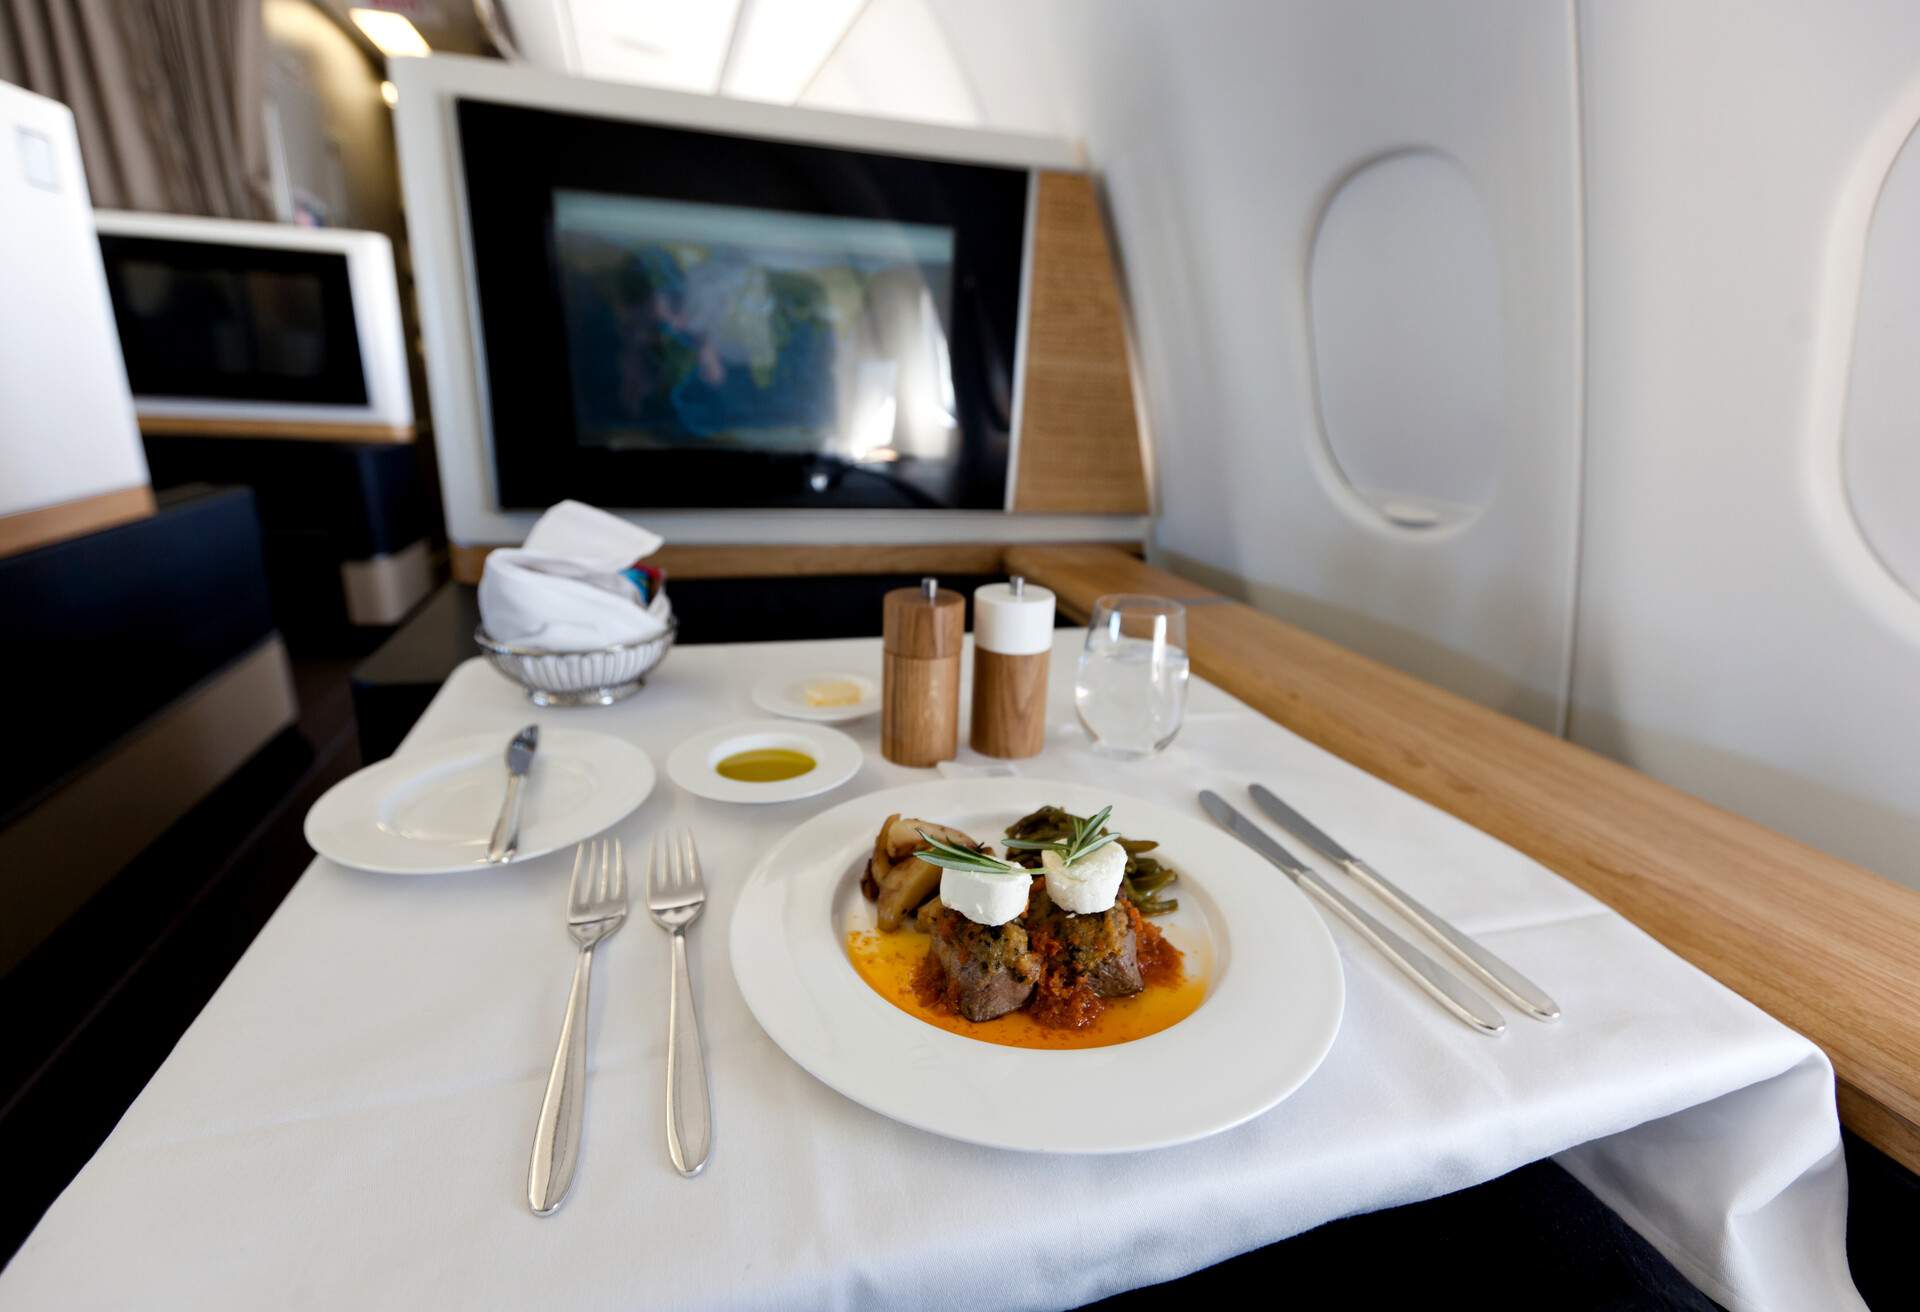 FLIGHT_IN-AIR-EXPERIENCE-OF-THE-FIRST-CLASS-FLIGHT